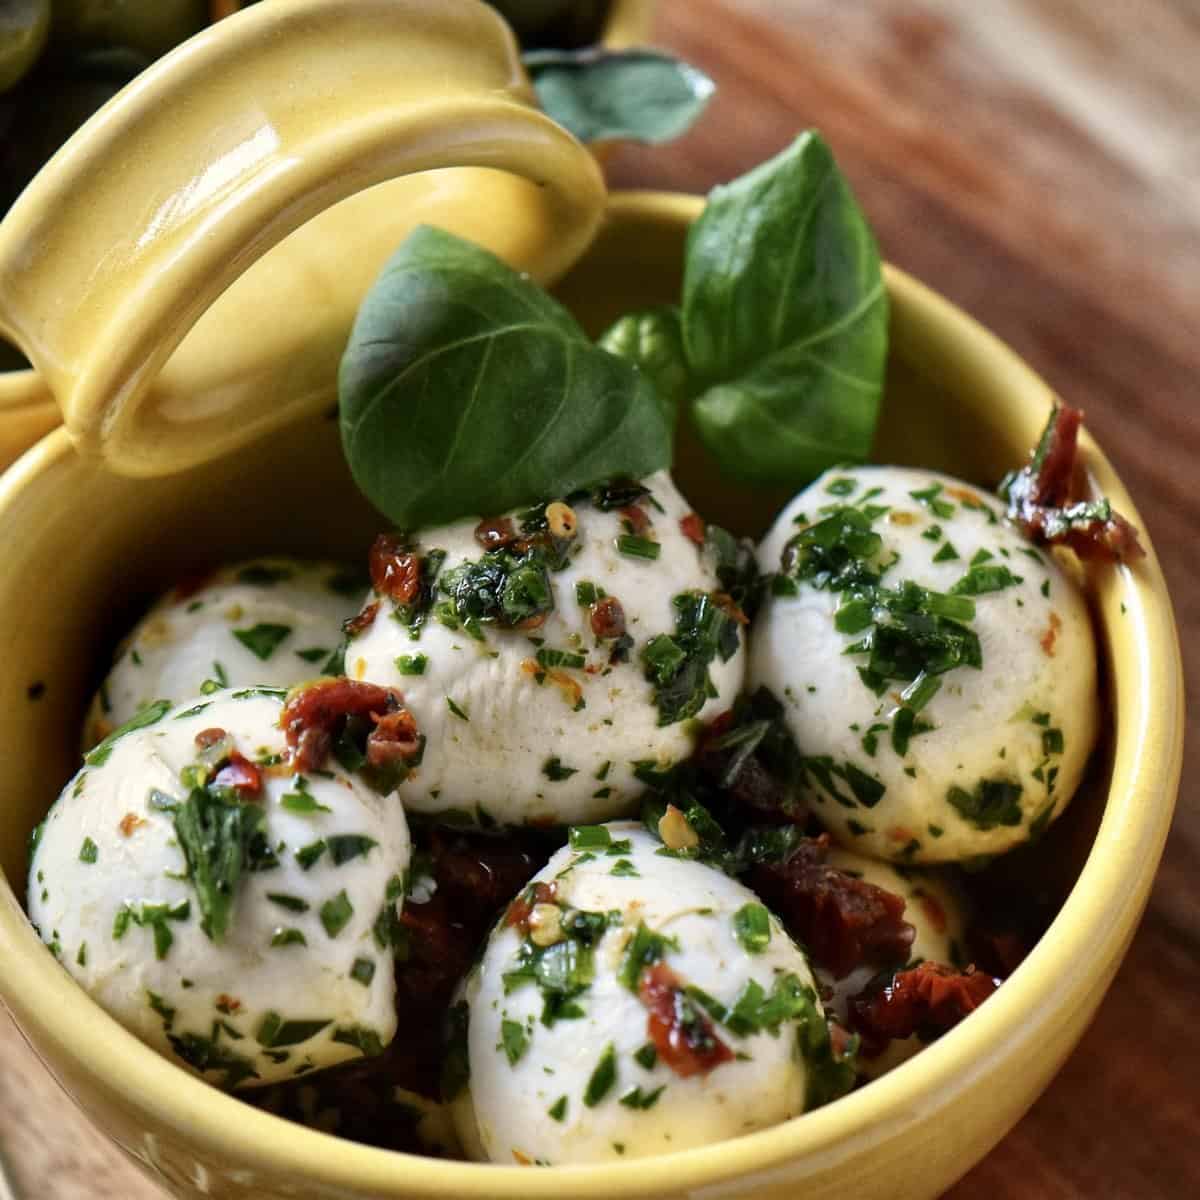 An overhead shot of the mozzarella balls aka bocconcini, in a ceramic dish. placed on a wooden board, surrounded by fresh basil leaves, dried oregano and red chili peppers.